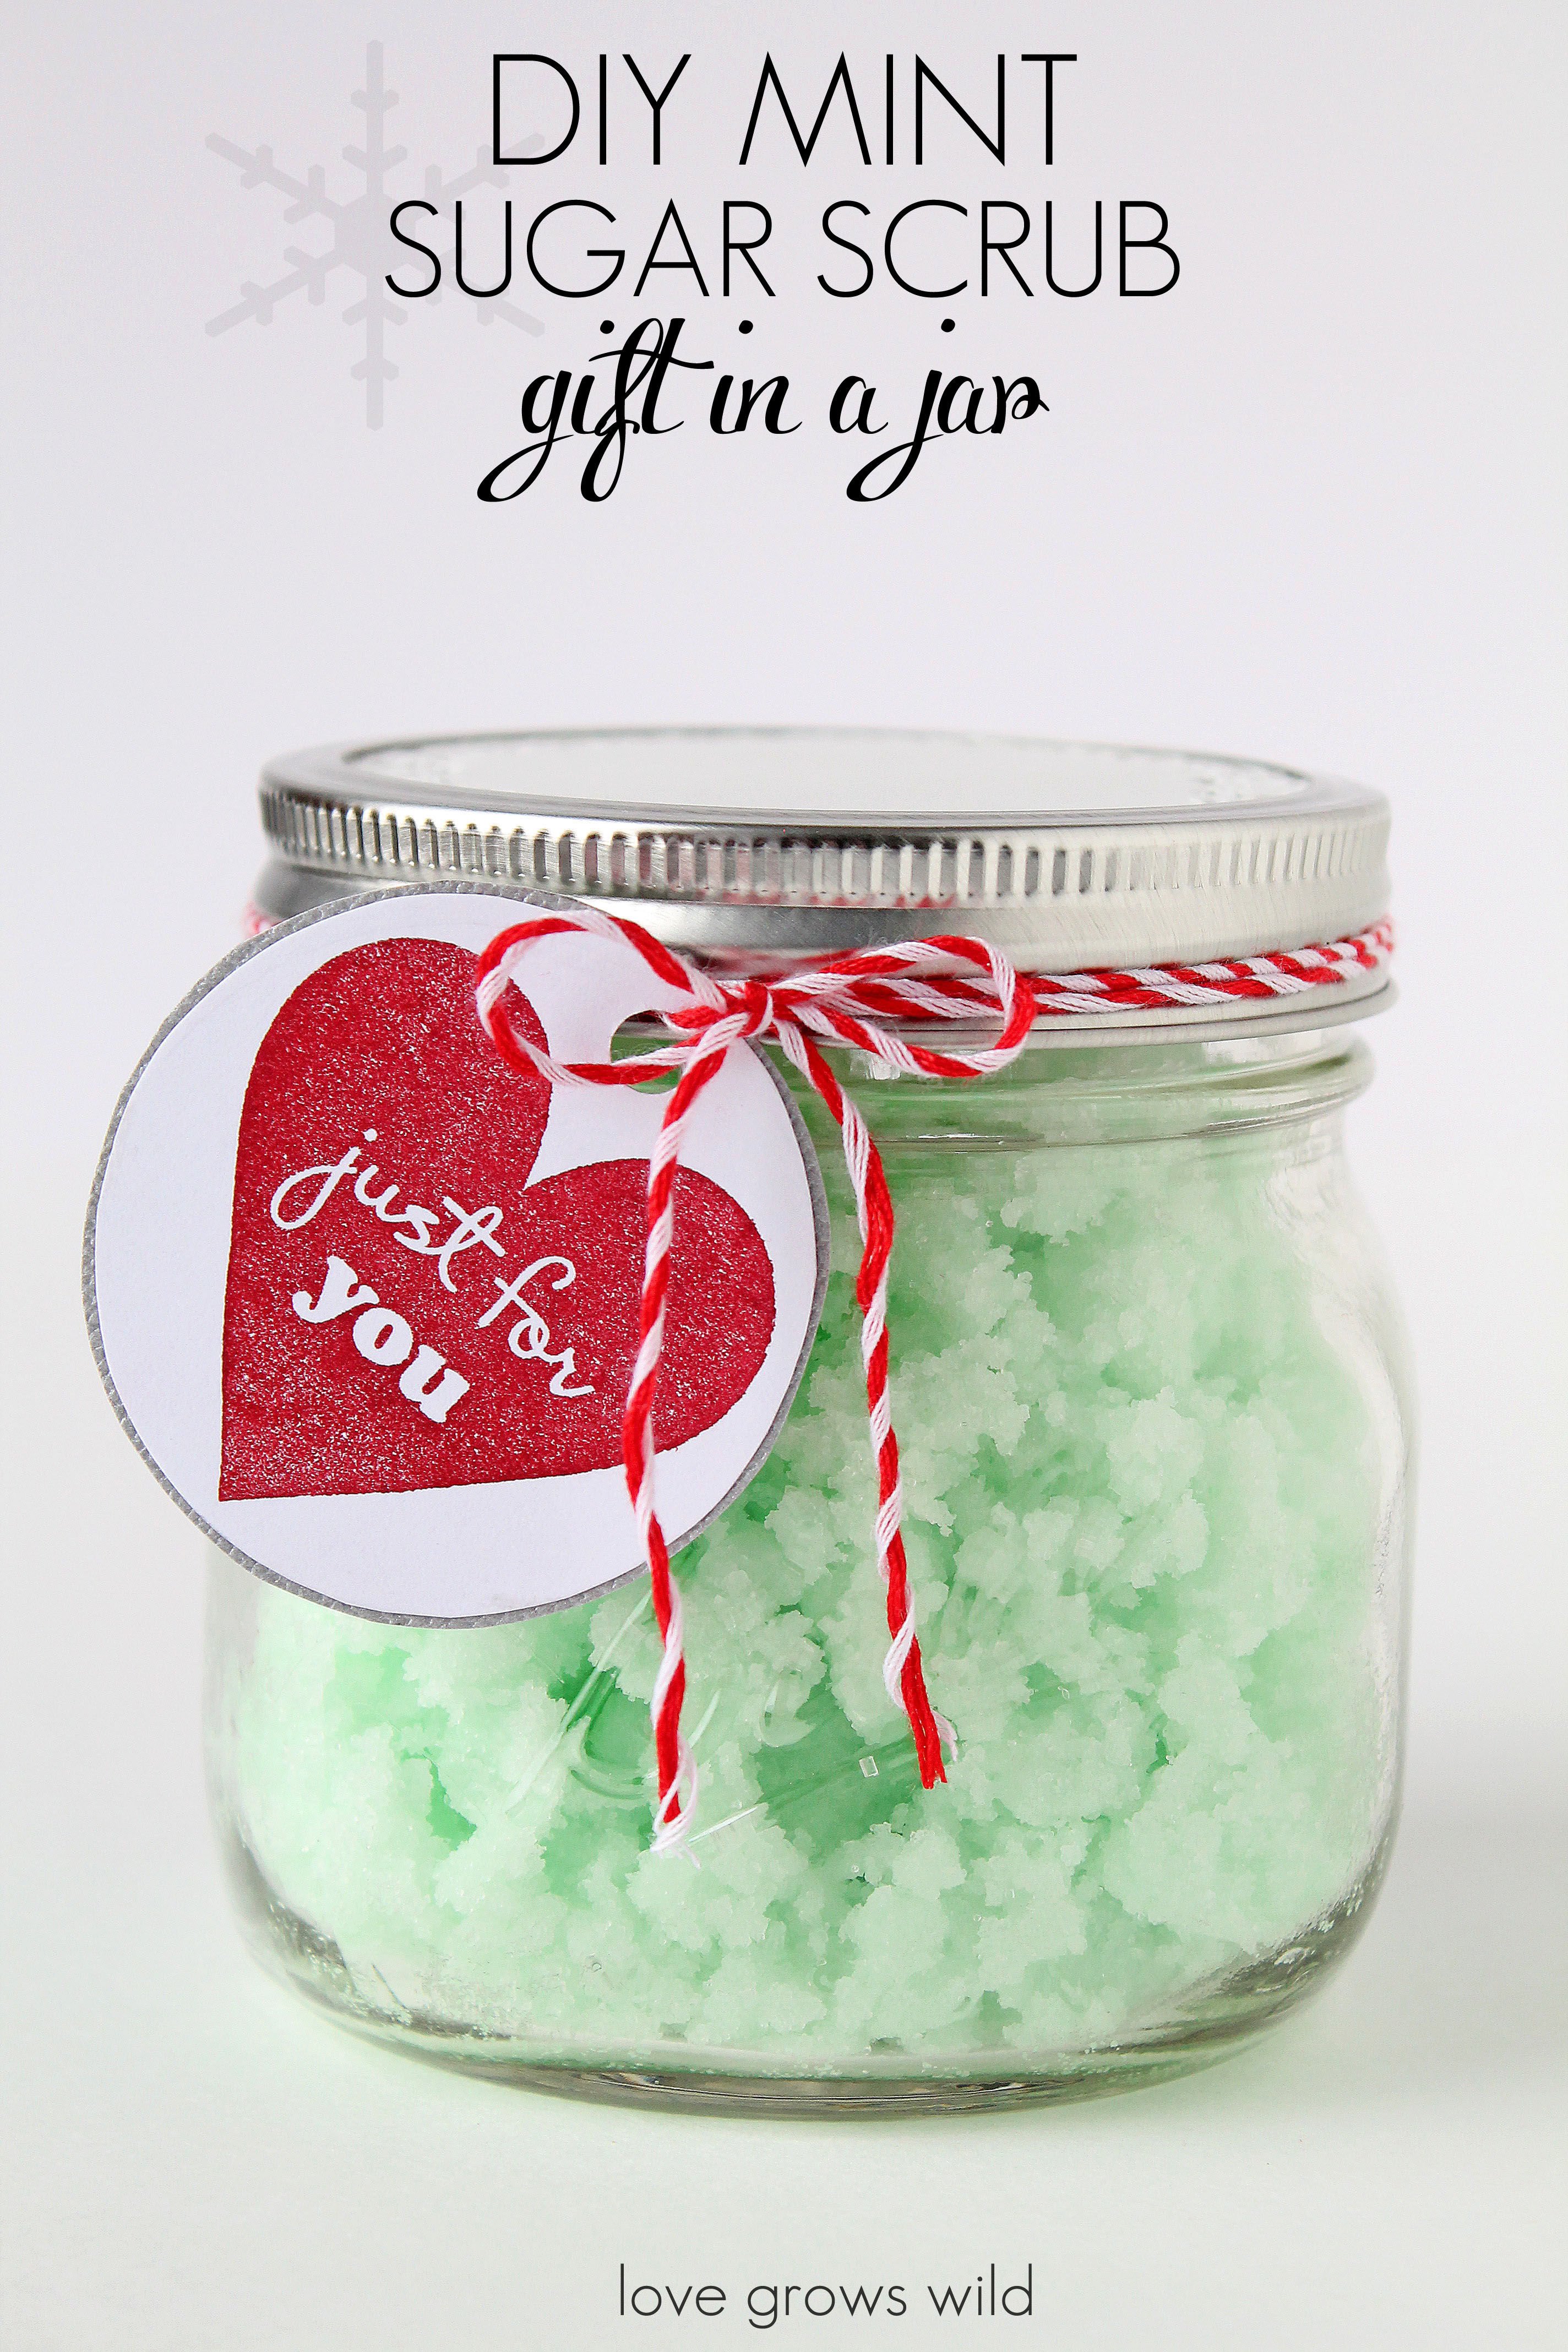 Decorated Mint Tins for Great Gift Ideas!